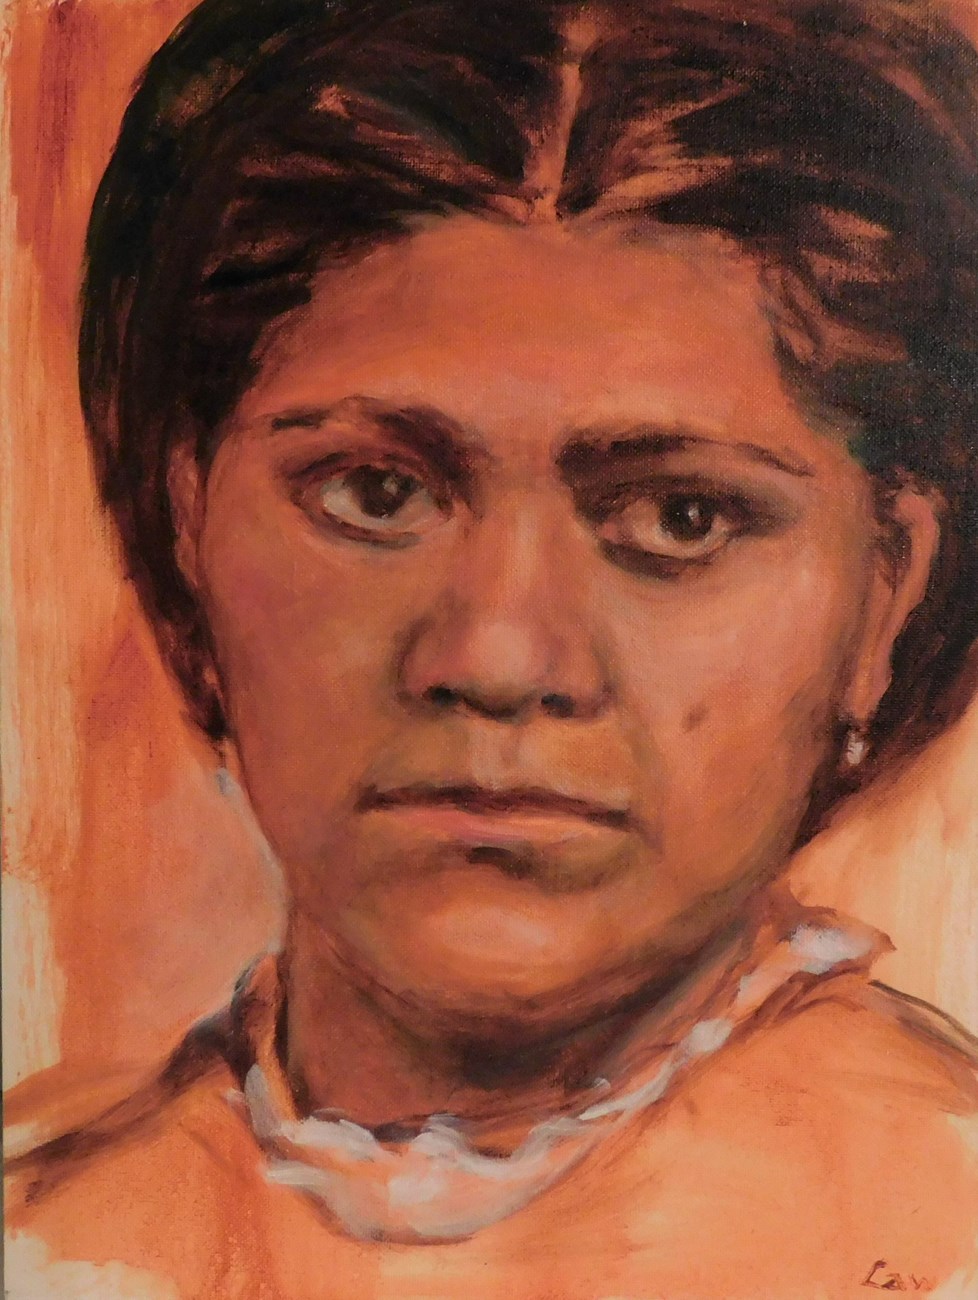 Painting of a young Native American woman with black hair.